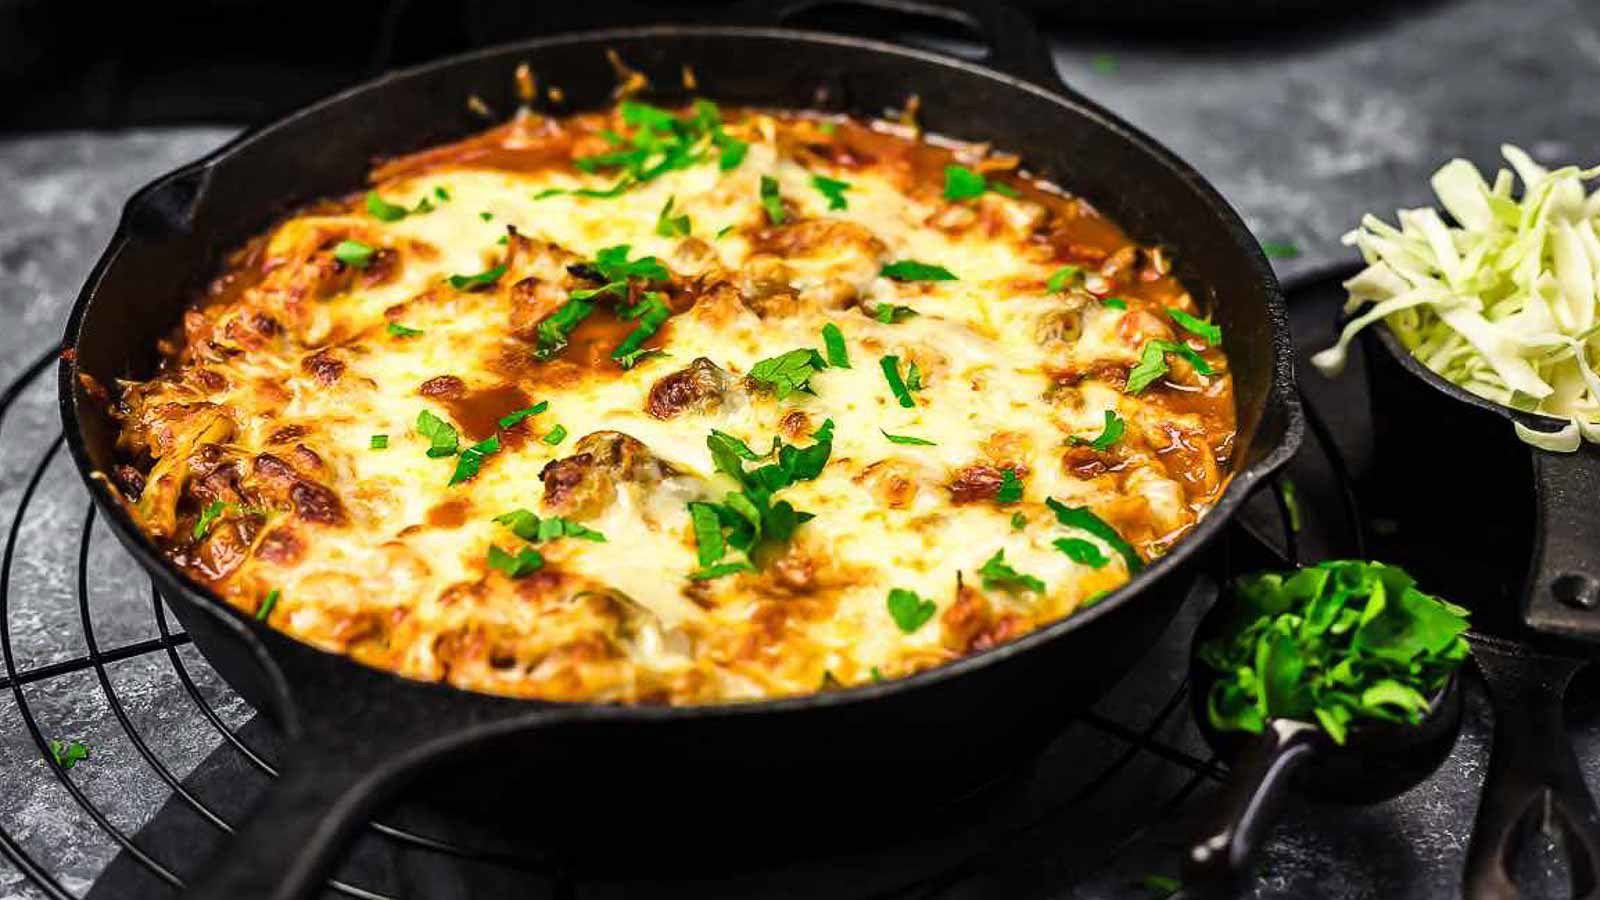 Epic Fail If You Haven't Tried These 13 Casseroles